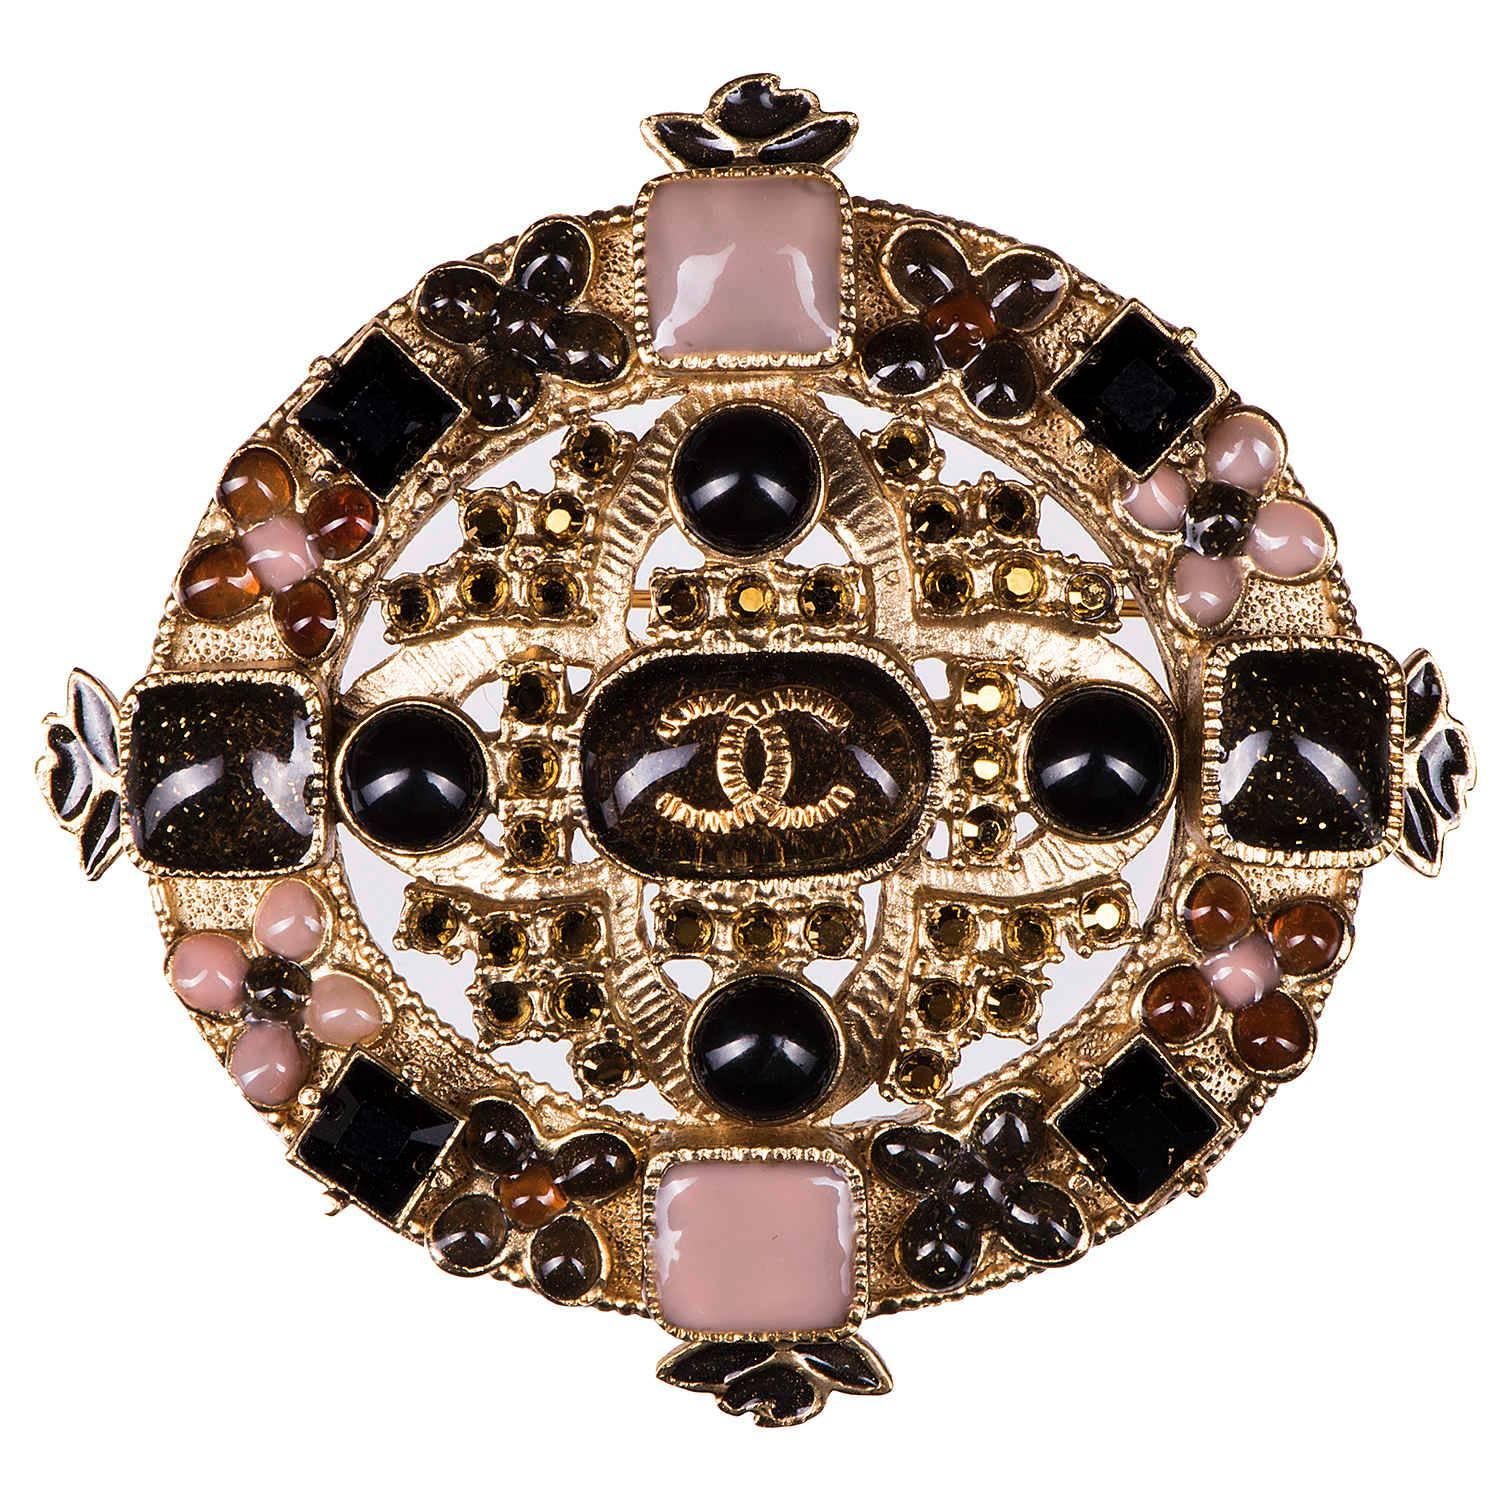  Rare Chanel Brooch with Pink, Yellow, Black & Amber Stones 